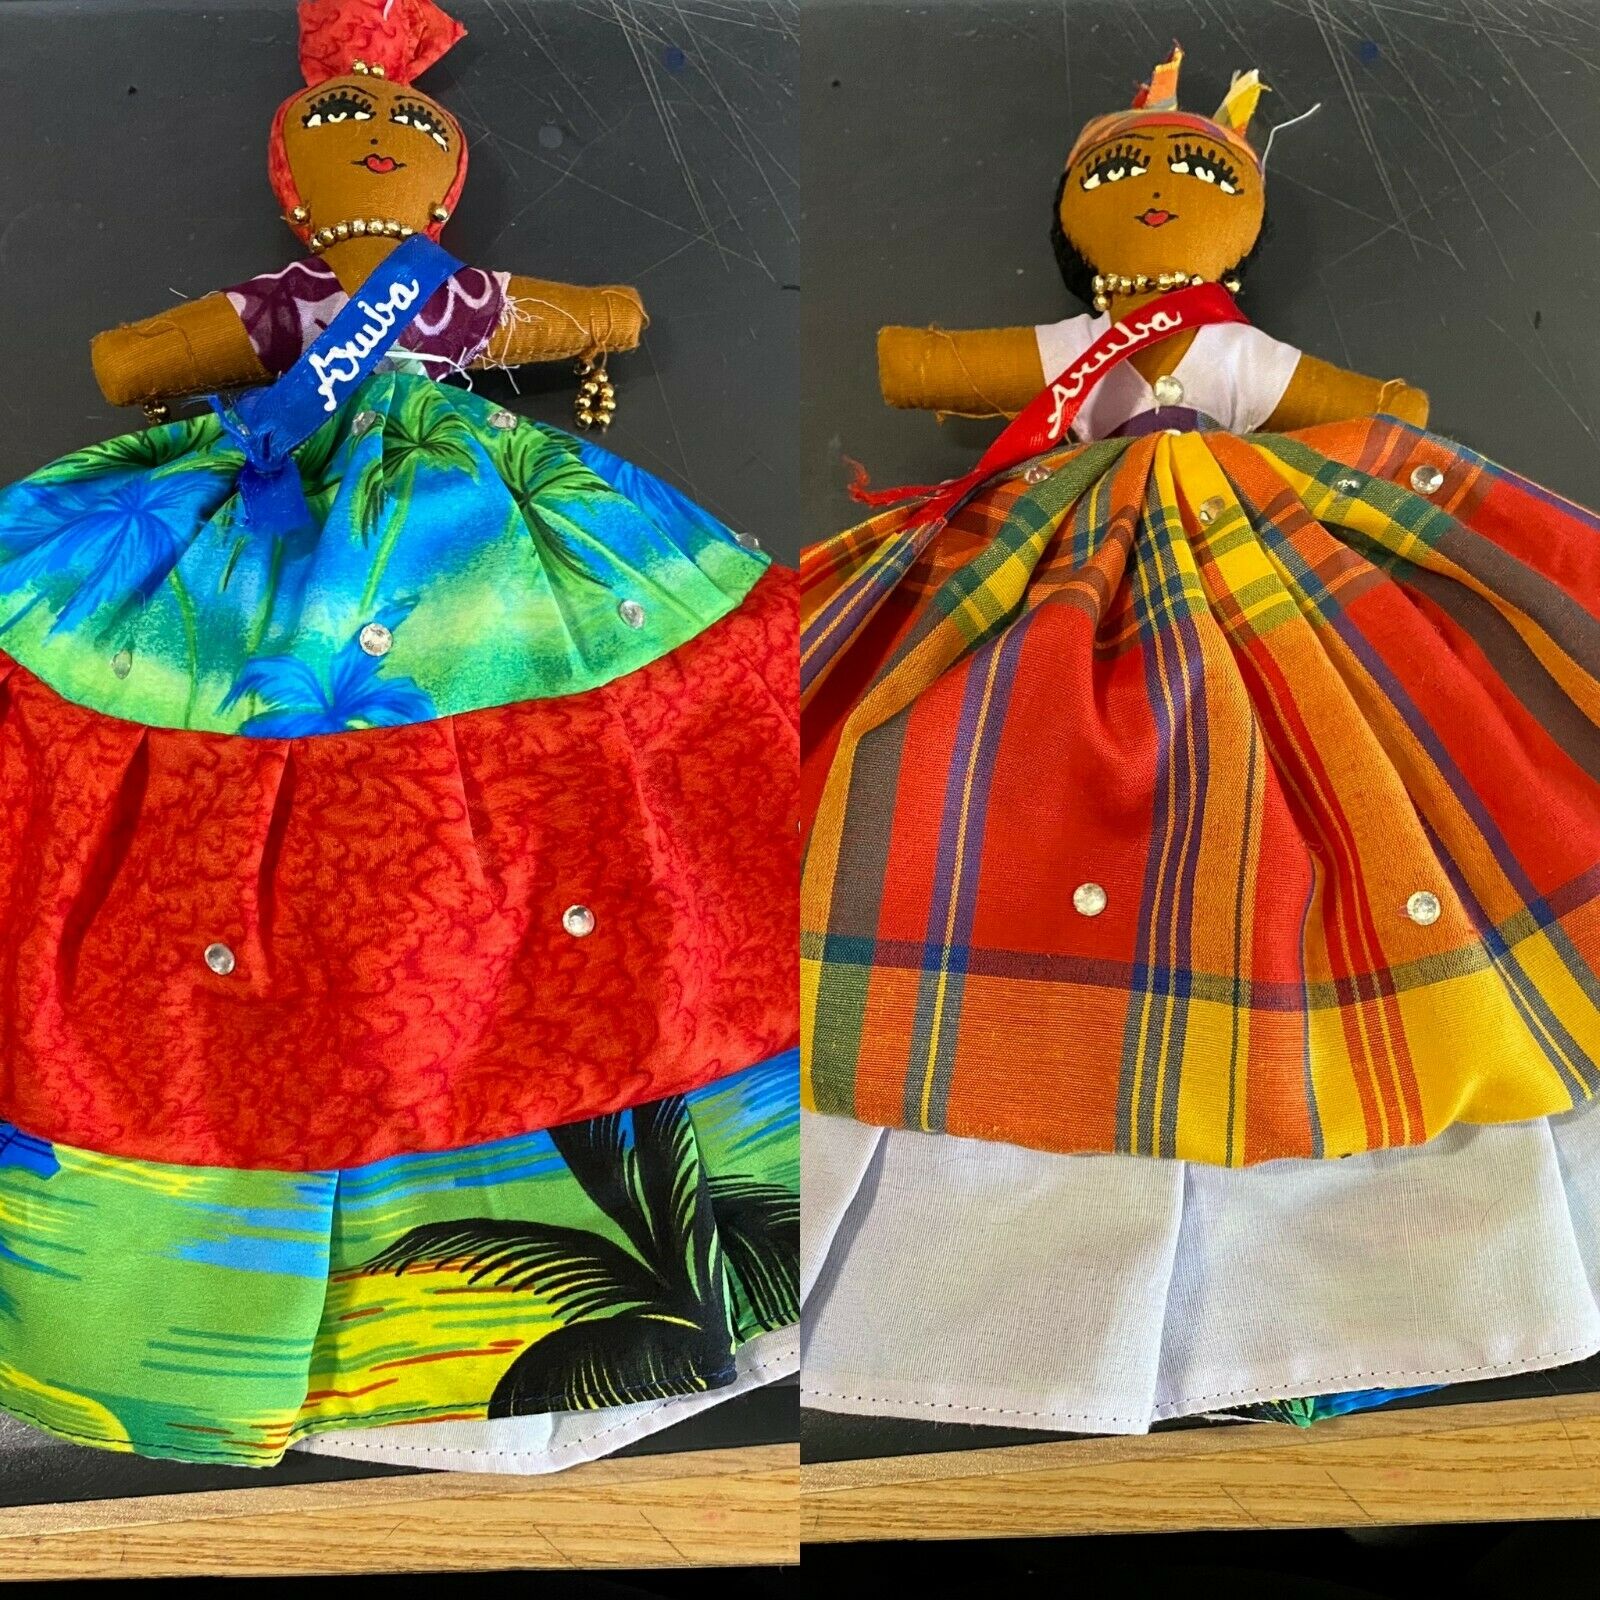 Rima Caribbean Doll Sewing. Aruba. Doll With 2 Faces, 2 Dresses Topsy Turvy